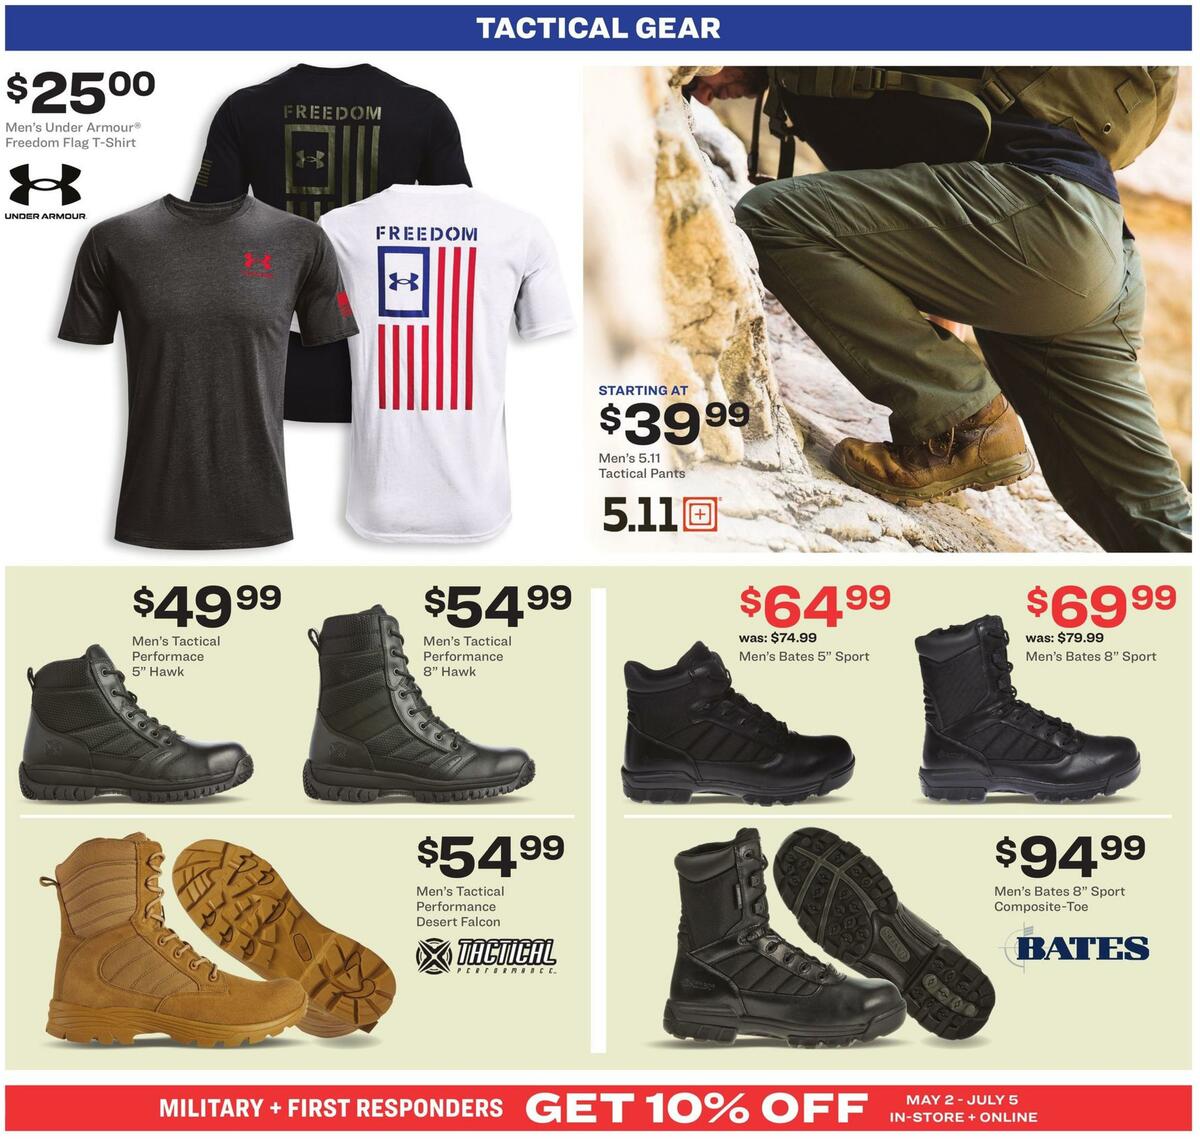 Academy Sports + Outdoors Weekly Ad from June 21